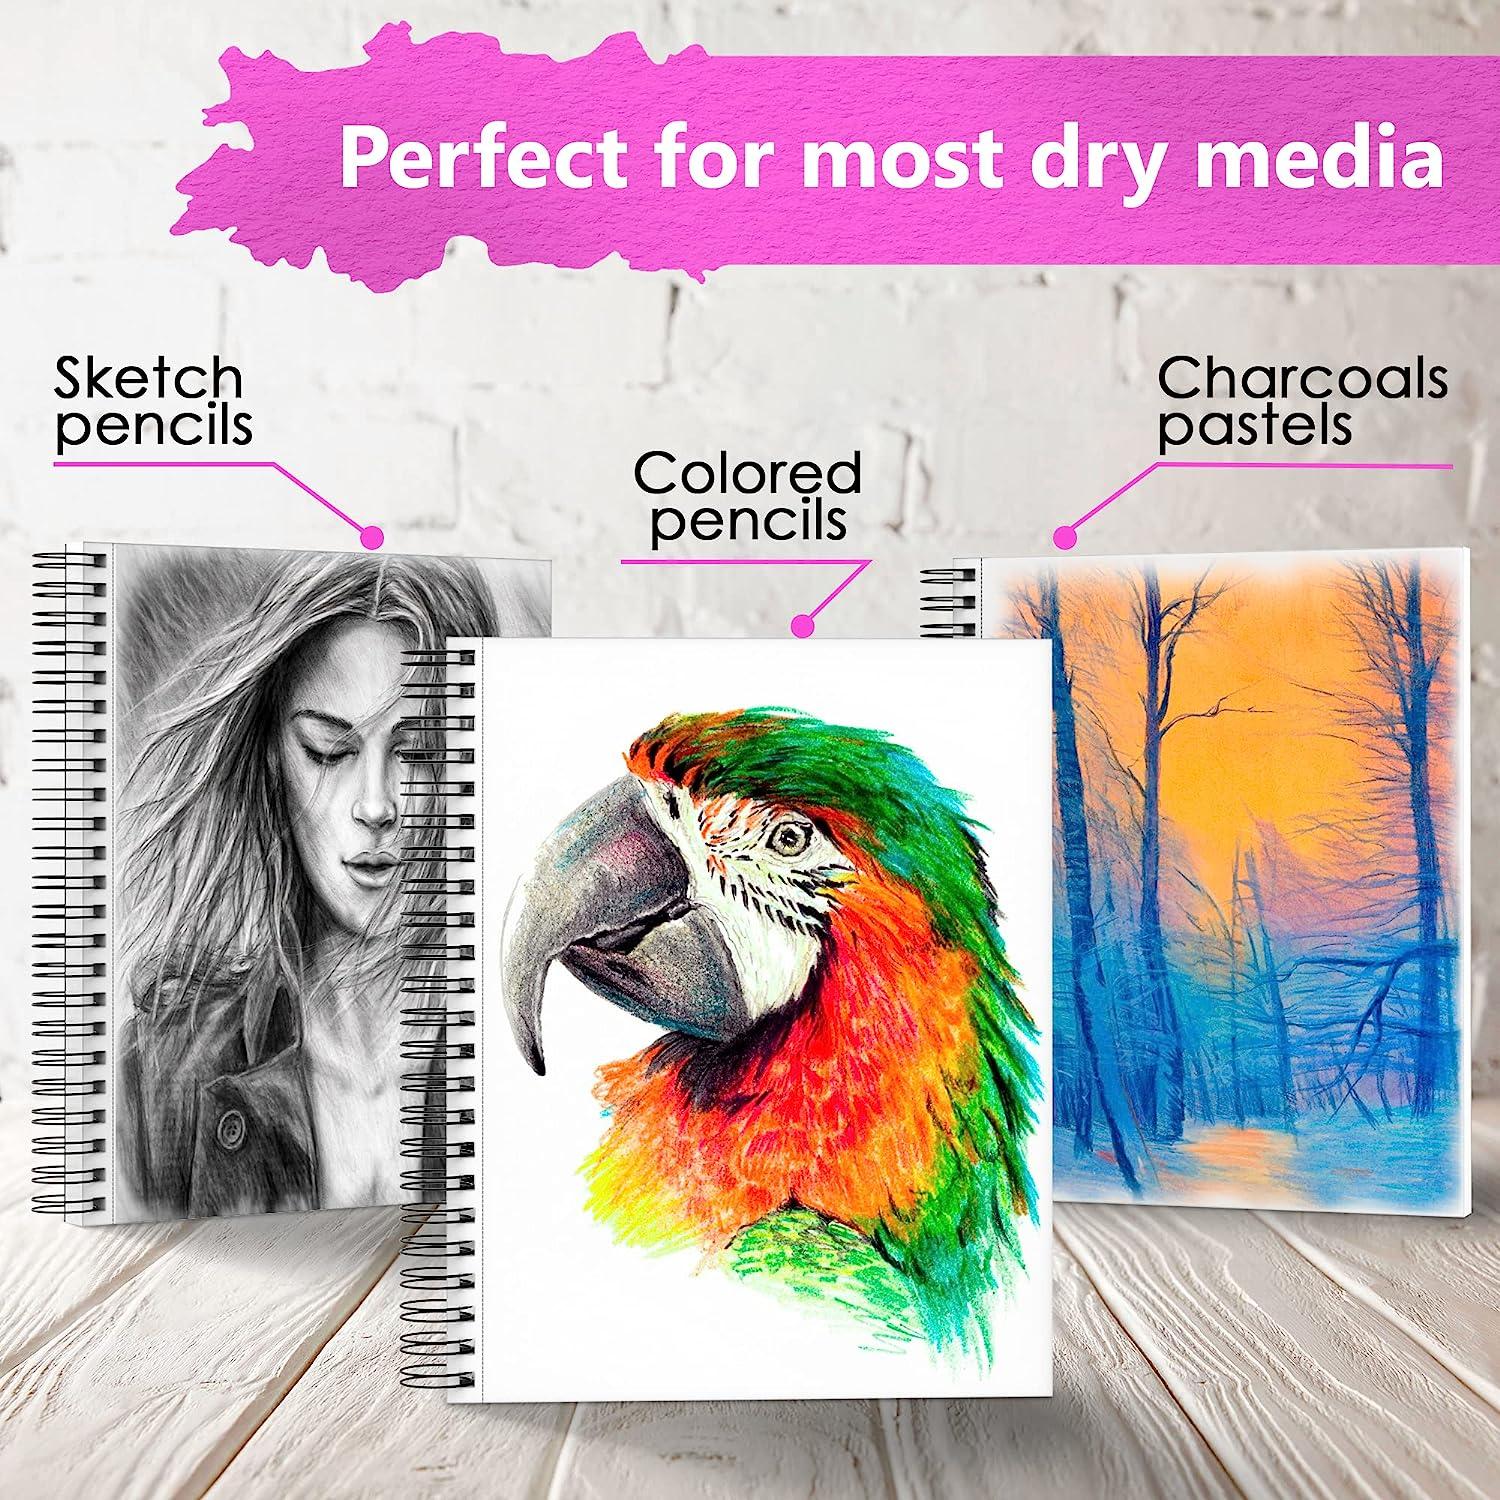 9x12 Premium Sketch Book Set, Spiral Bound, Pack of 2, 200 Sheets 100g/m2,  Acid-free Drawing Paper, Ideal for Kids, Teens & Adults 